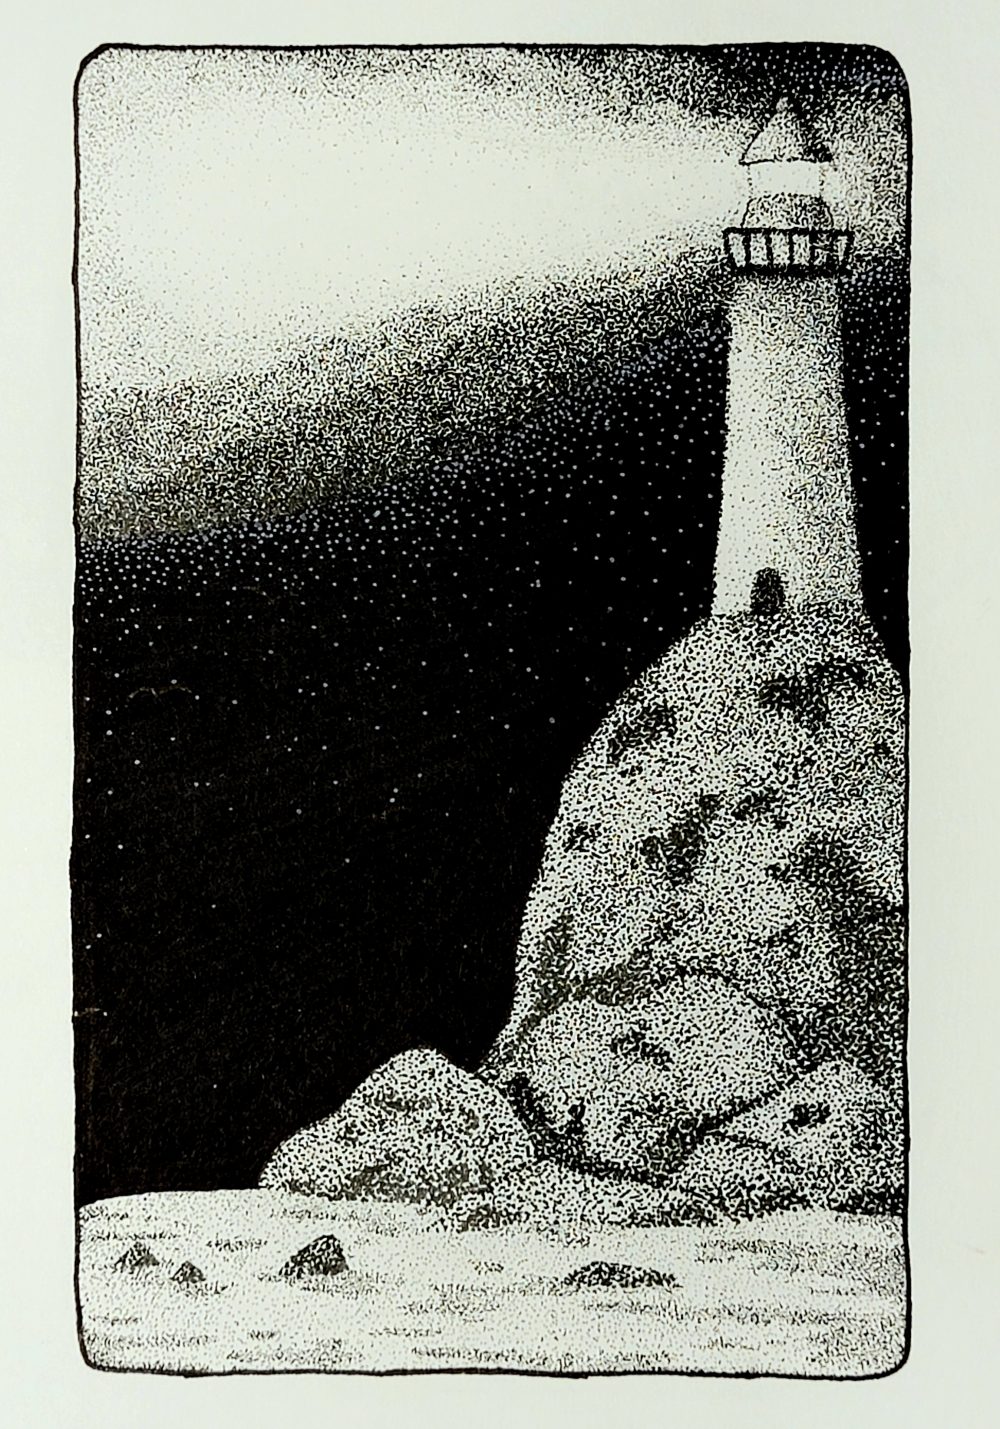 A drawing of a lighthouse slicing through the night sky in black ink.